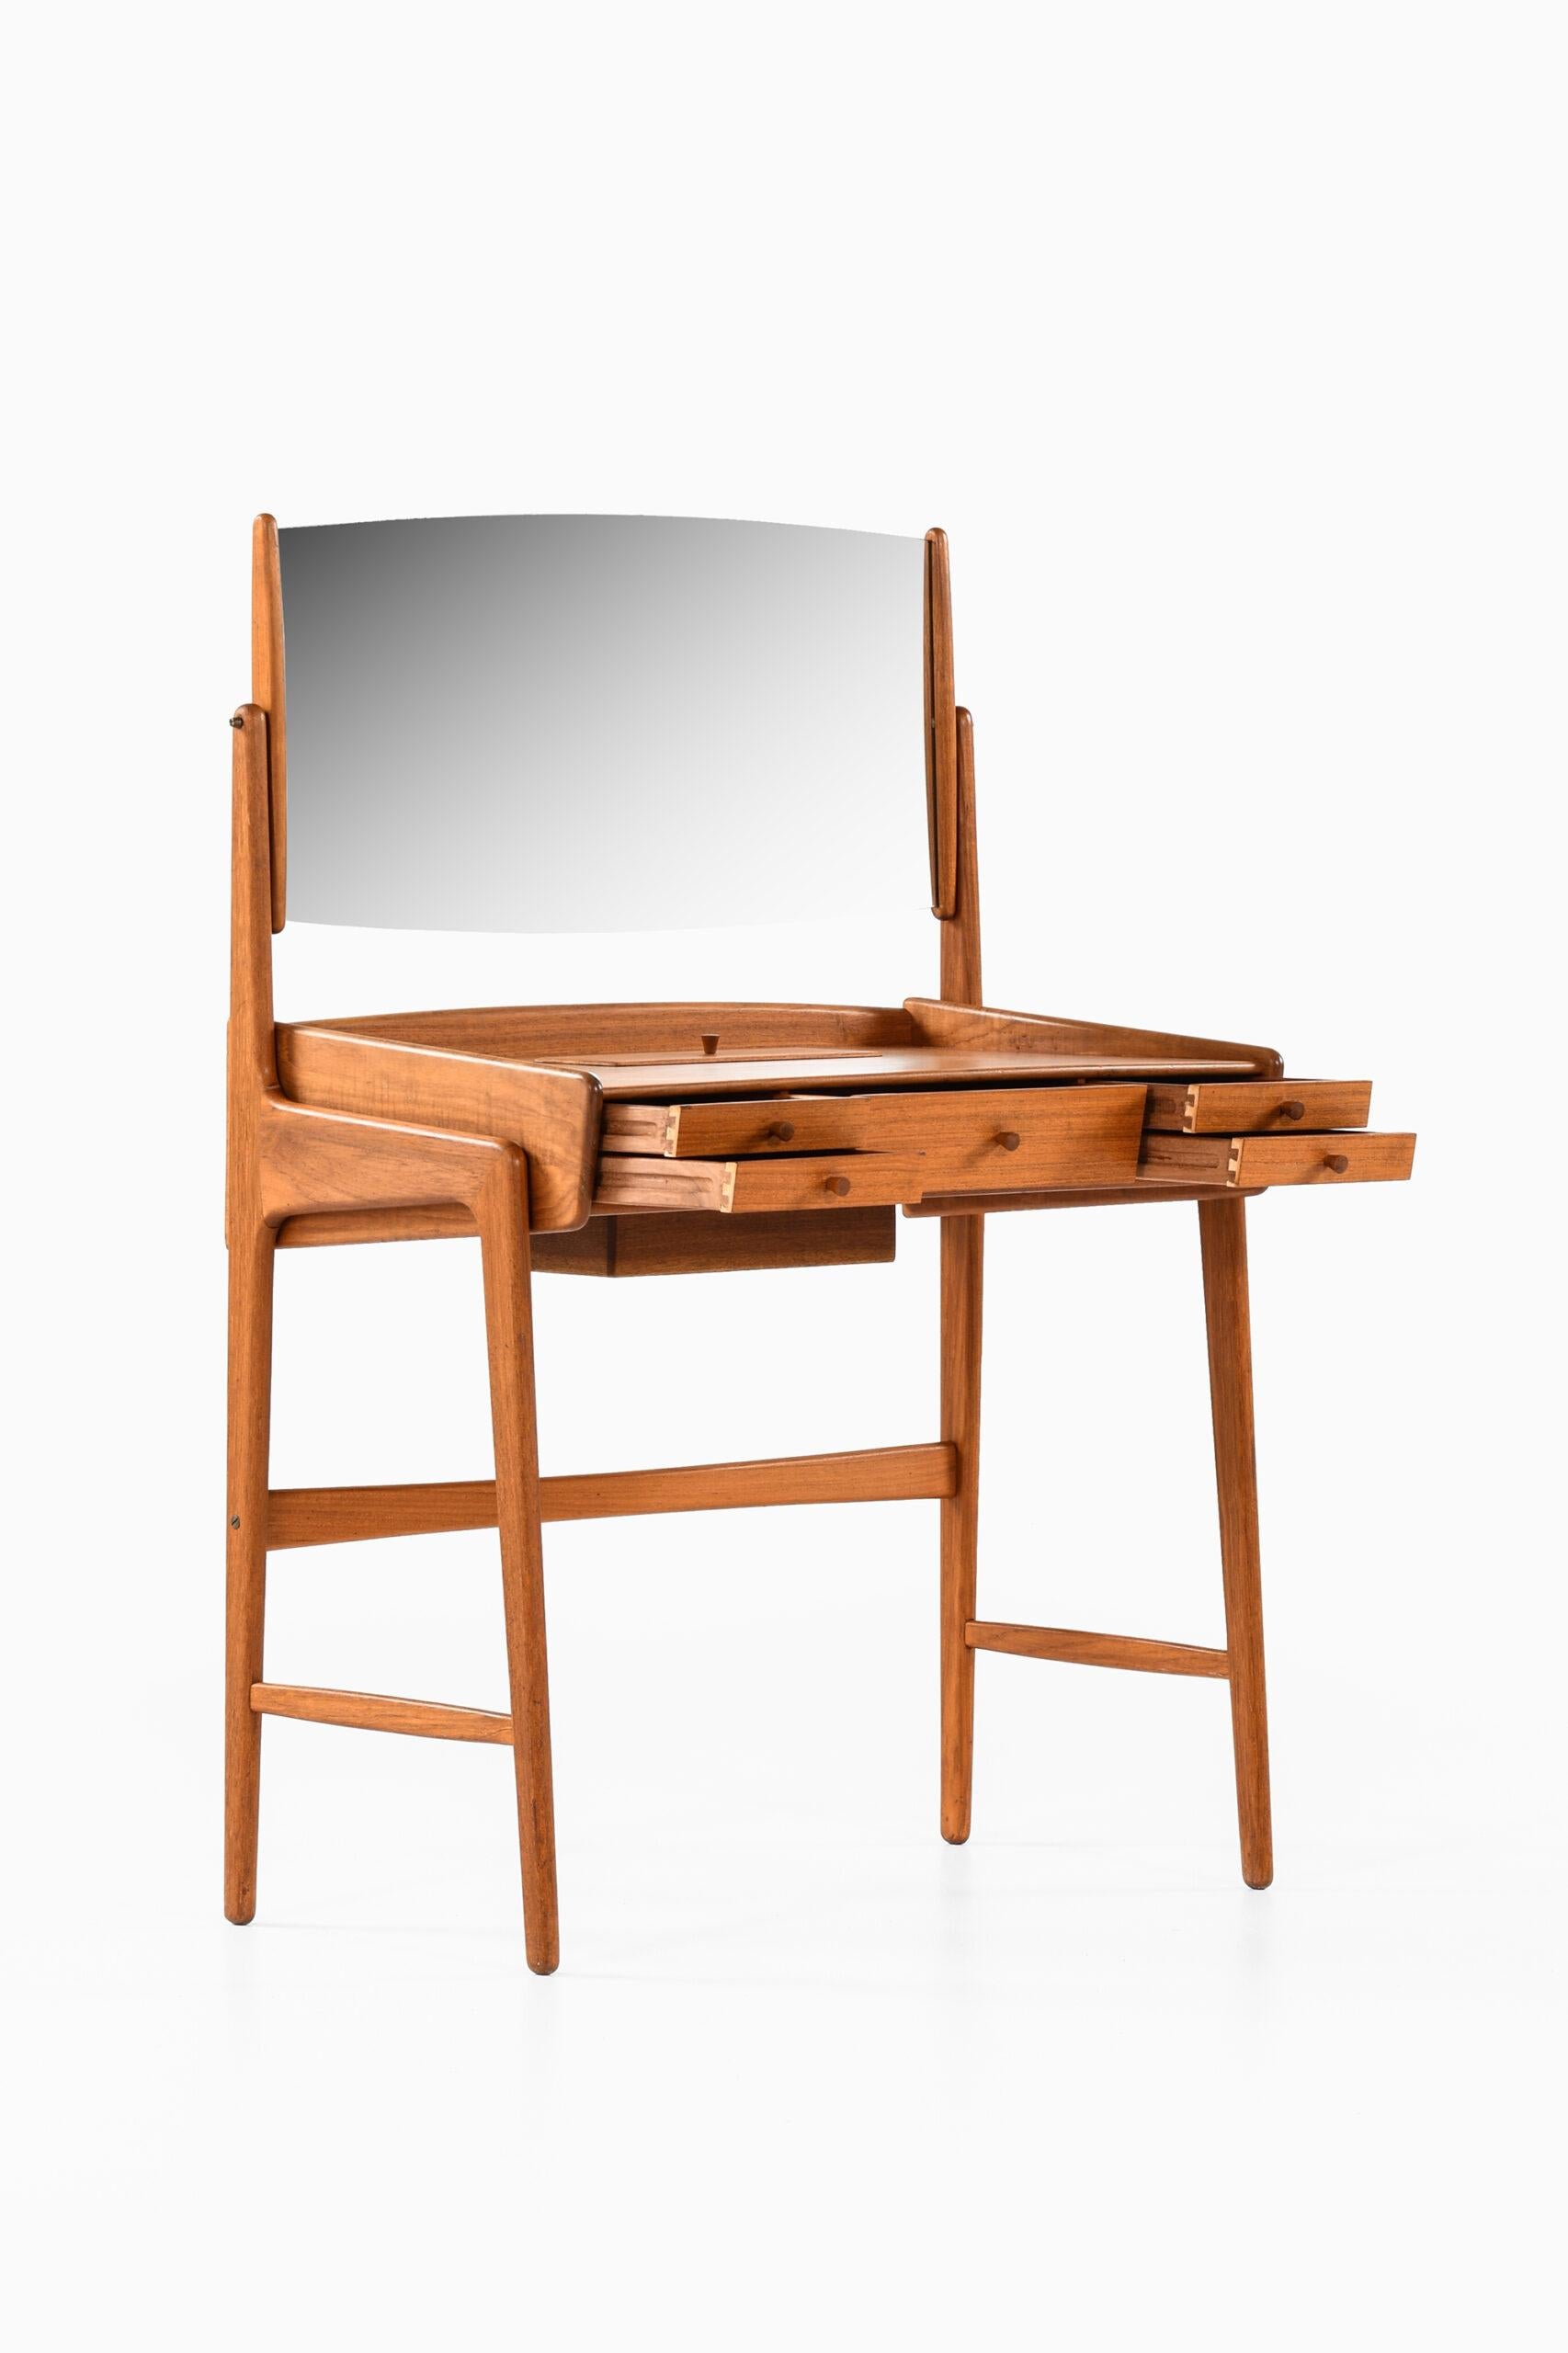 Mid-20th Century Vanity Attributed to Svend Aage Madsen Produced in Denmark